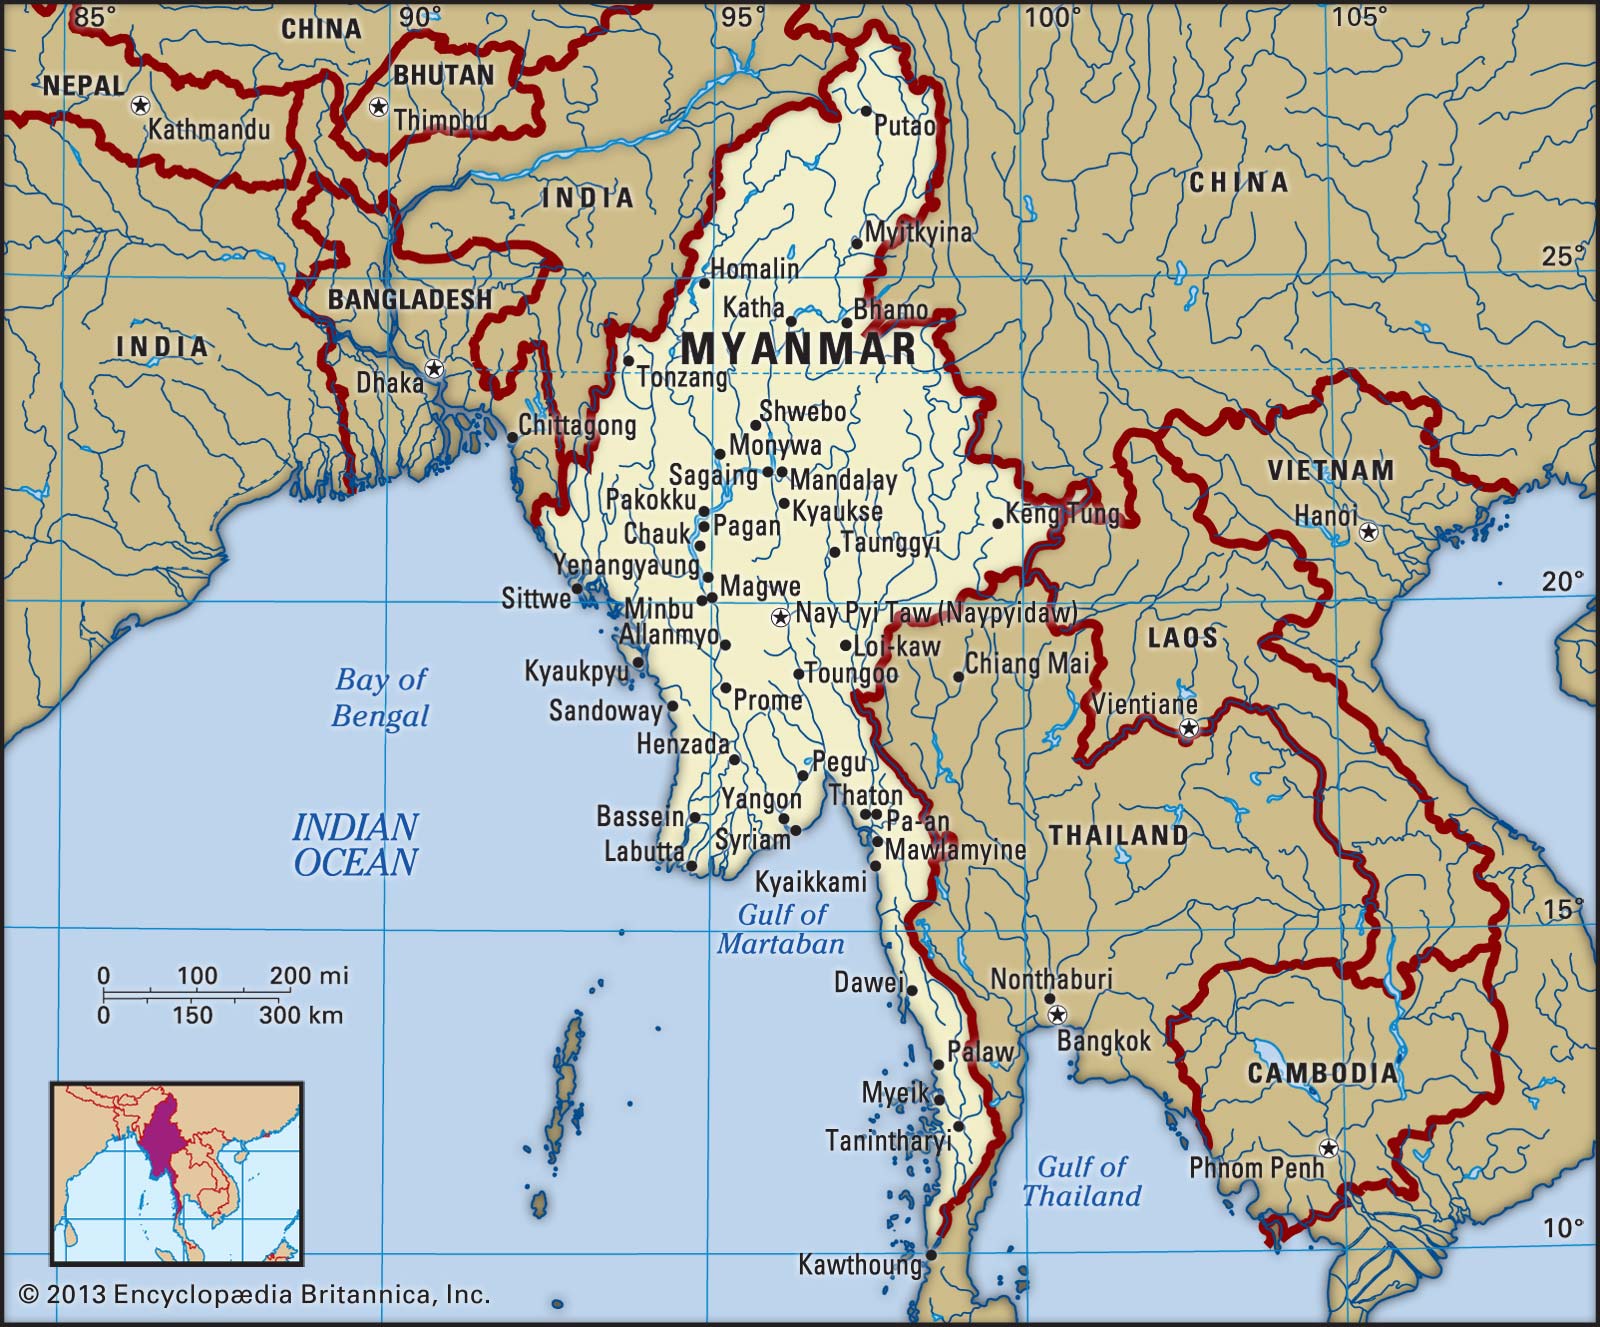 Myanmar Coup: What to do if You or Your Foreign Investment are in the